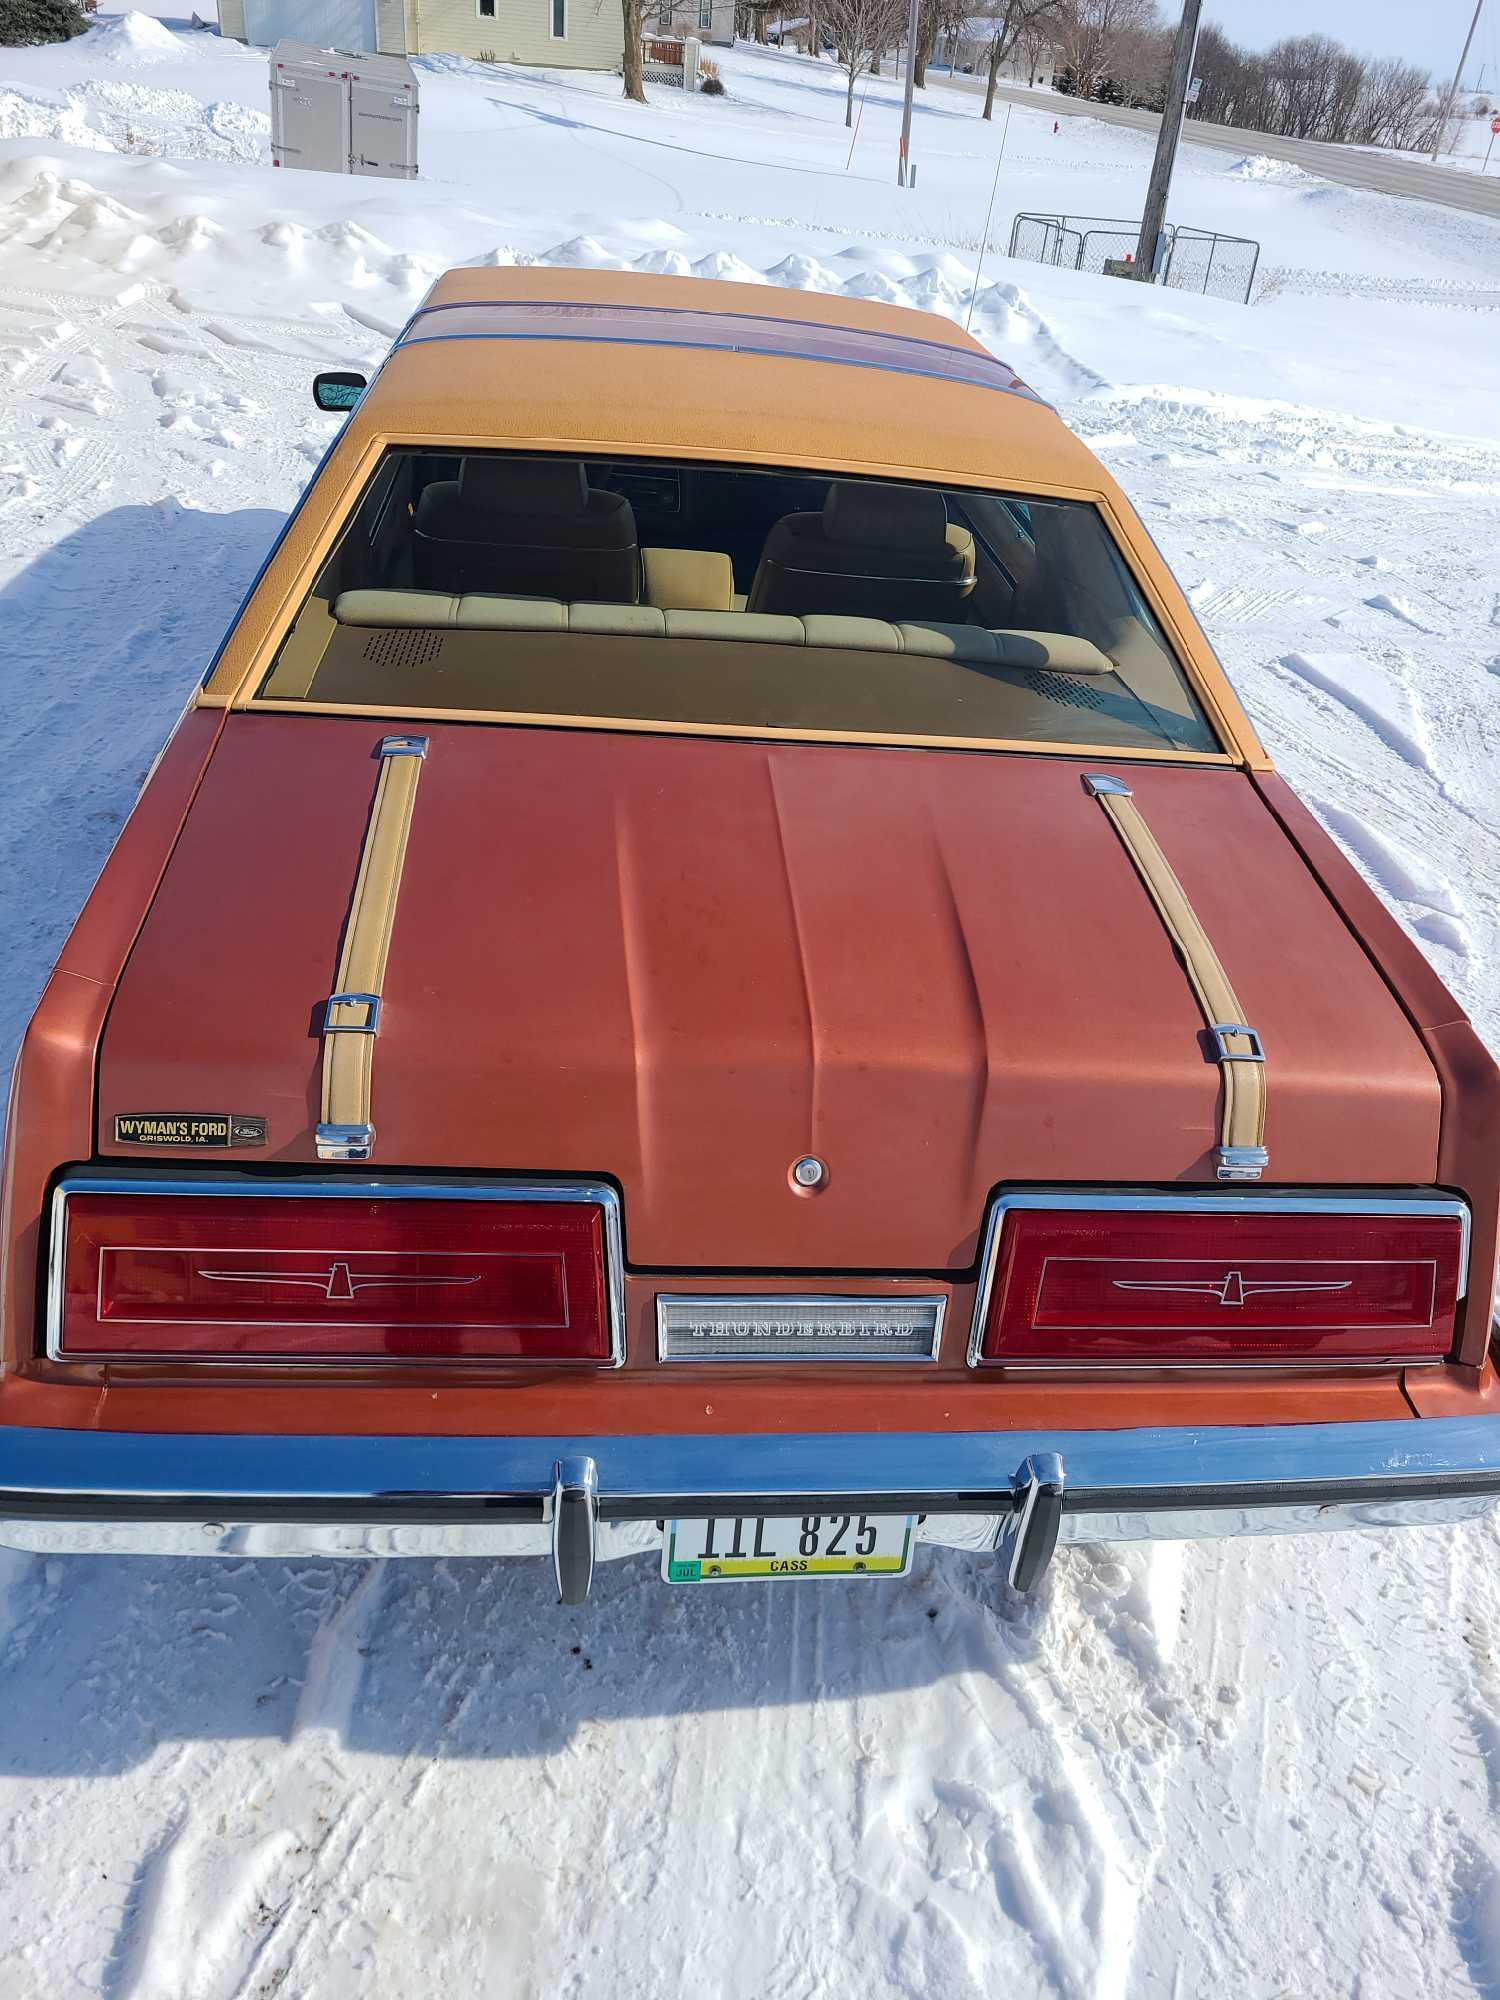 1979 FORD THUNDERBIRD 2 DR HARDTOP - ONE OWNER